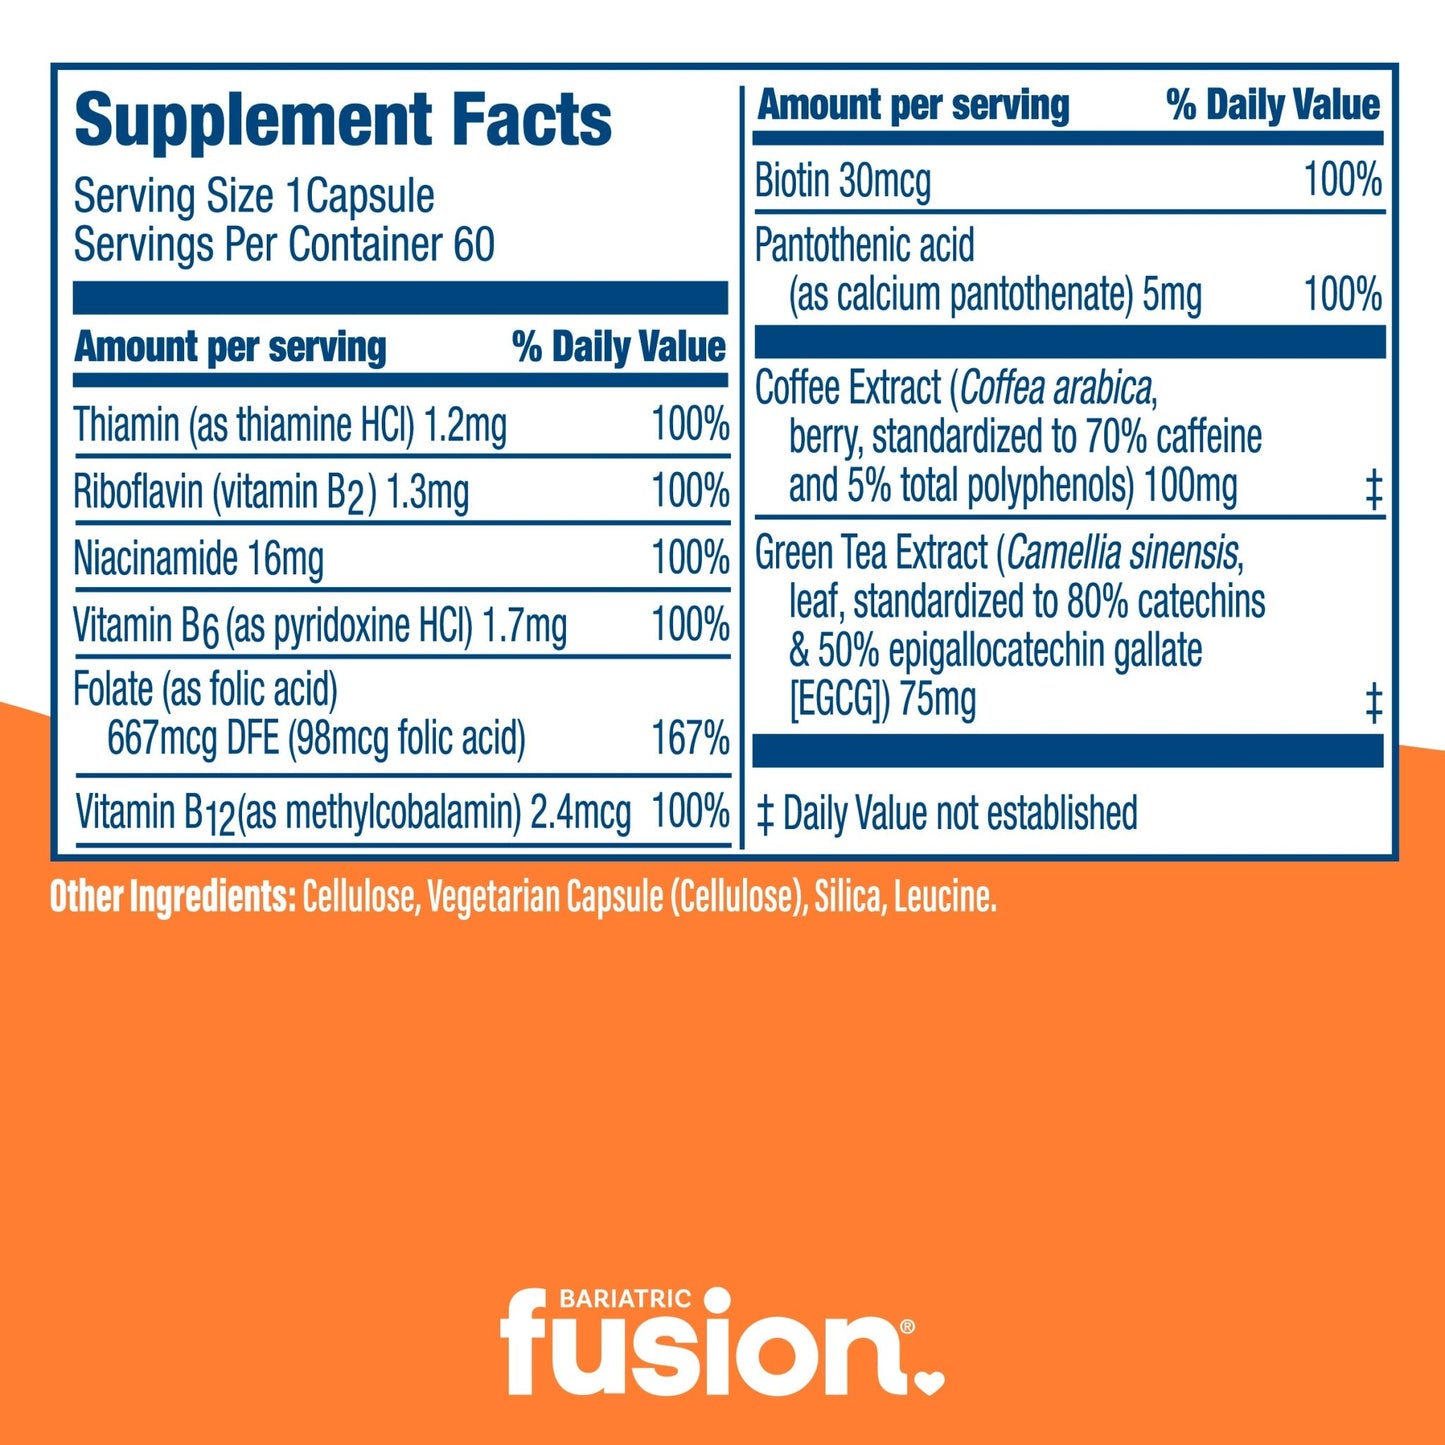 Bariatric Fusion Energy Support supplement facts.